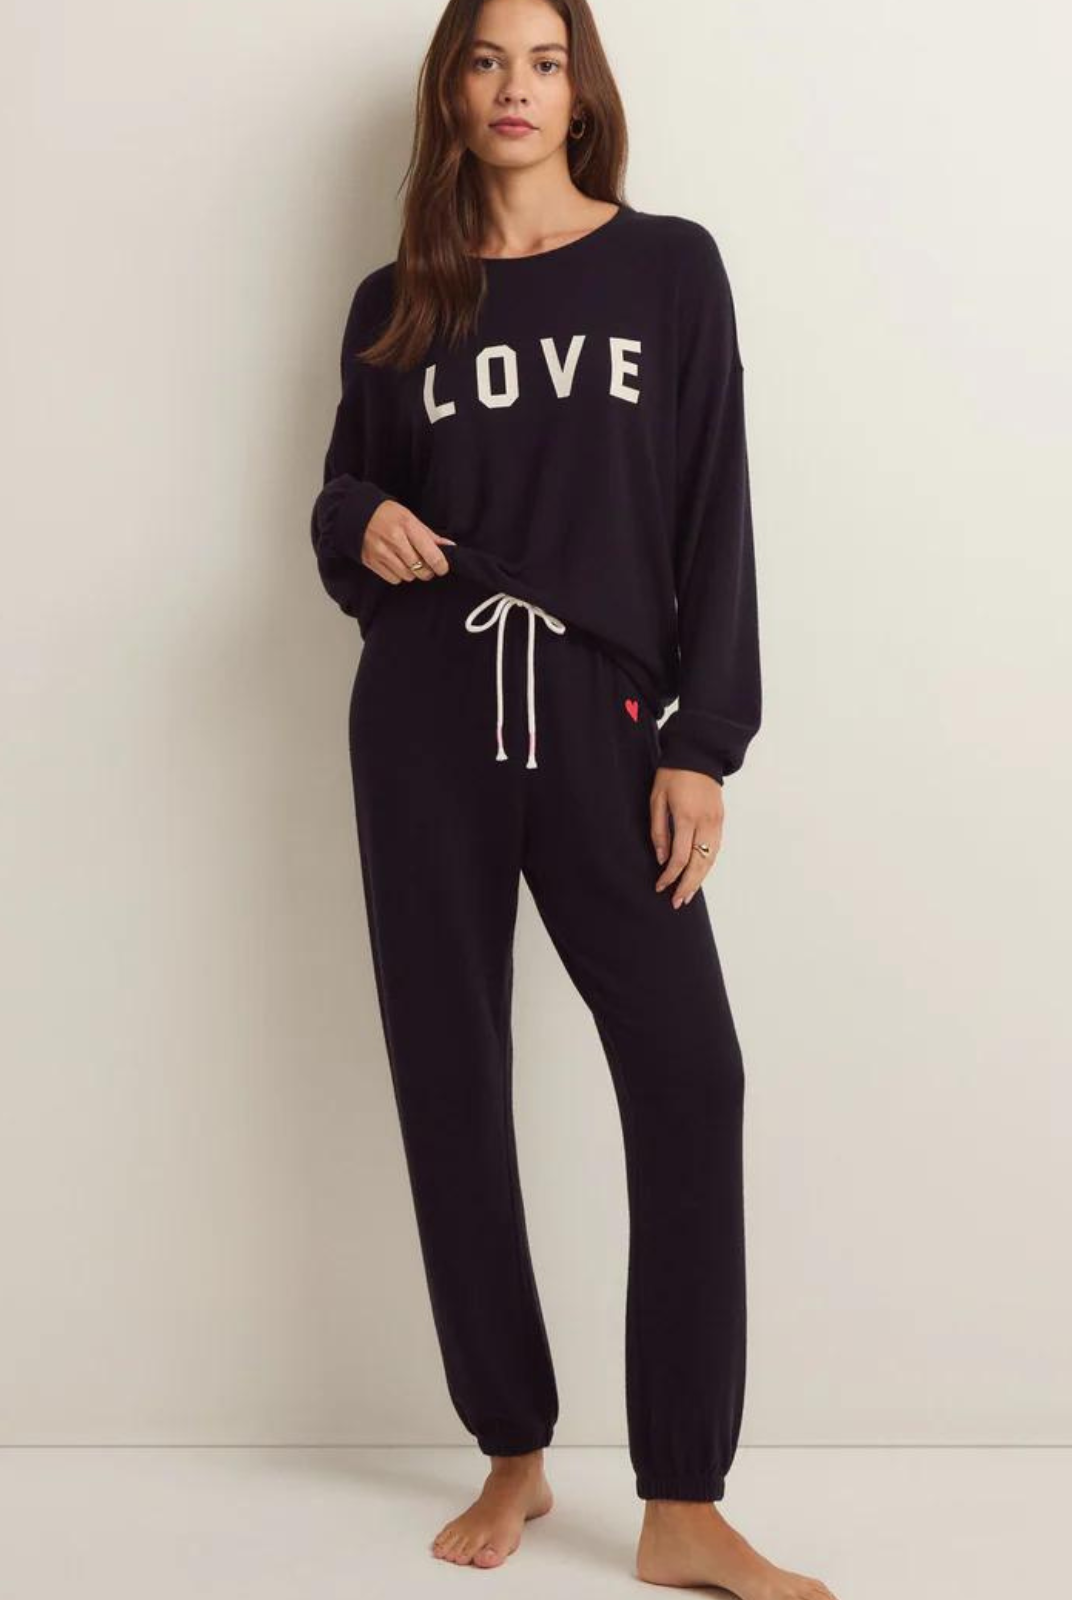 Z Supply Team Love LS Top We're on Team Love!  Relaxed Cloud Knit: 62% Polyester, 34% Rayon, 4% Spandex Screen print "love" Soft Brushed Knit Machine Wash Cold, Tumble Dry Low or Lay Flat to Dry, Do Not Dry Clean Style #ZLT241117